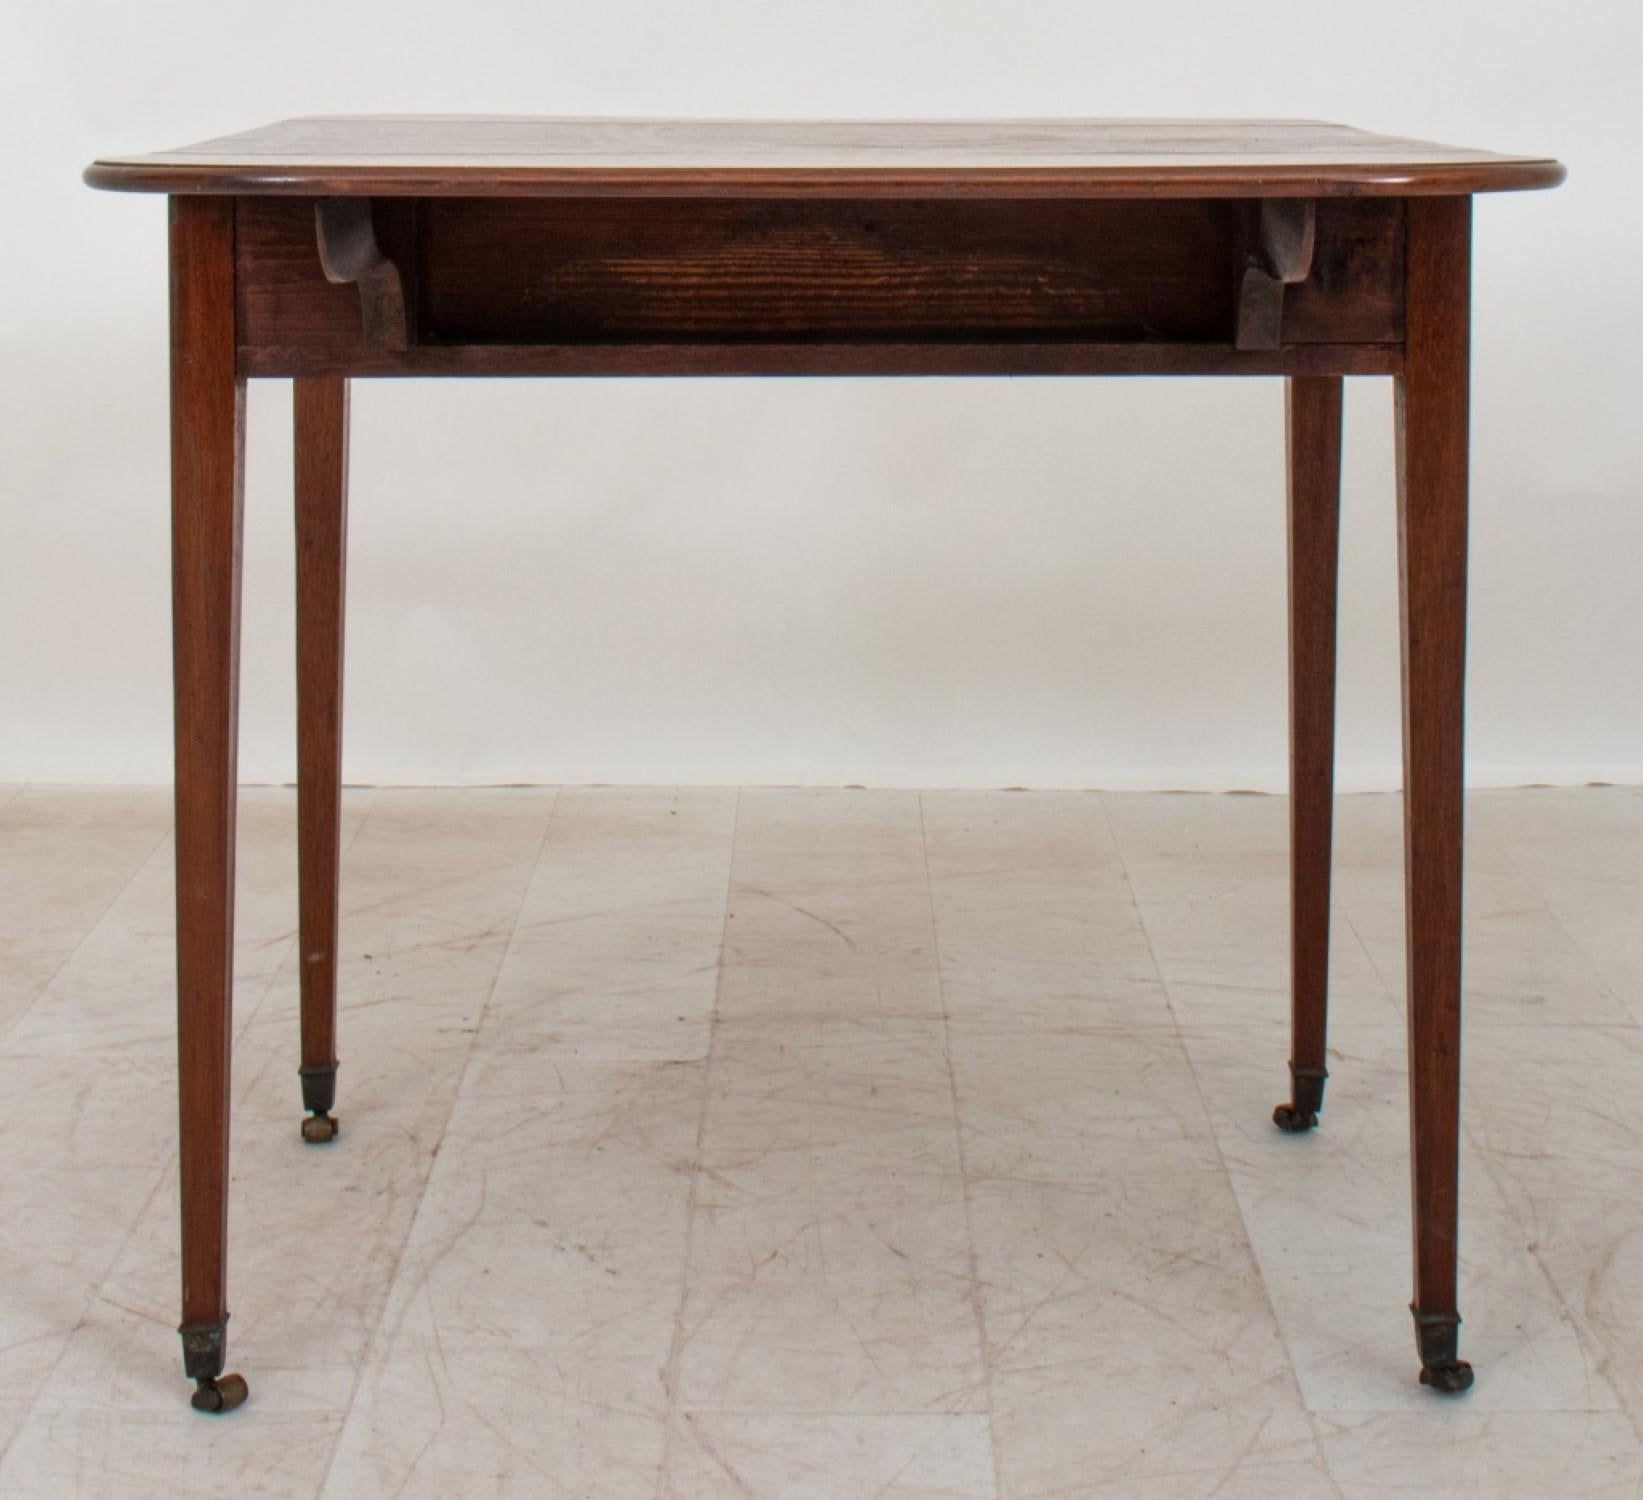 The George III style mahogany Pembroke table has a rectangular top and shaped drop leaves. The side features a drawer above tapering square legs. 

Dealer: S138XX



